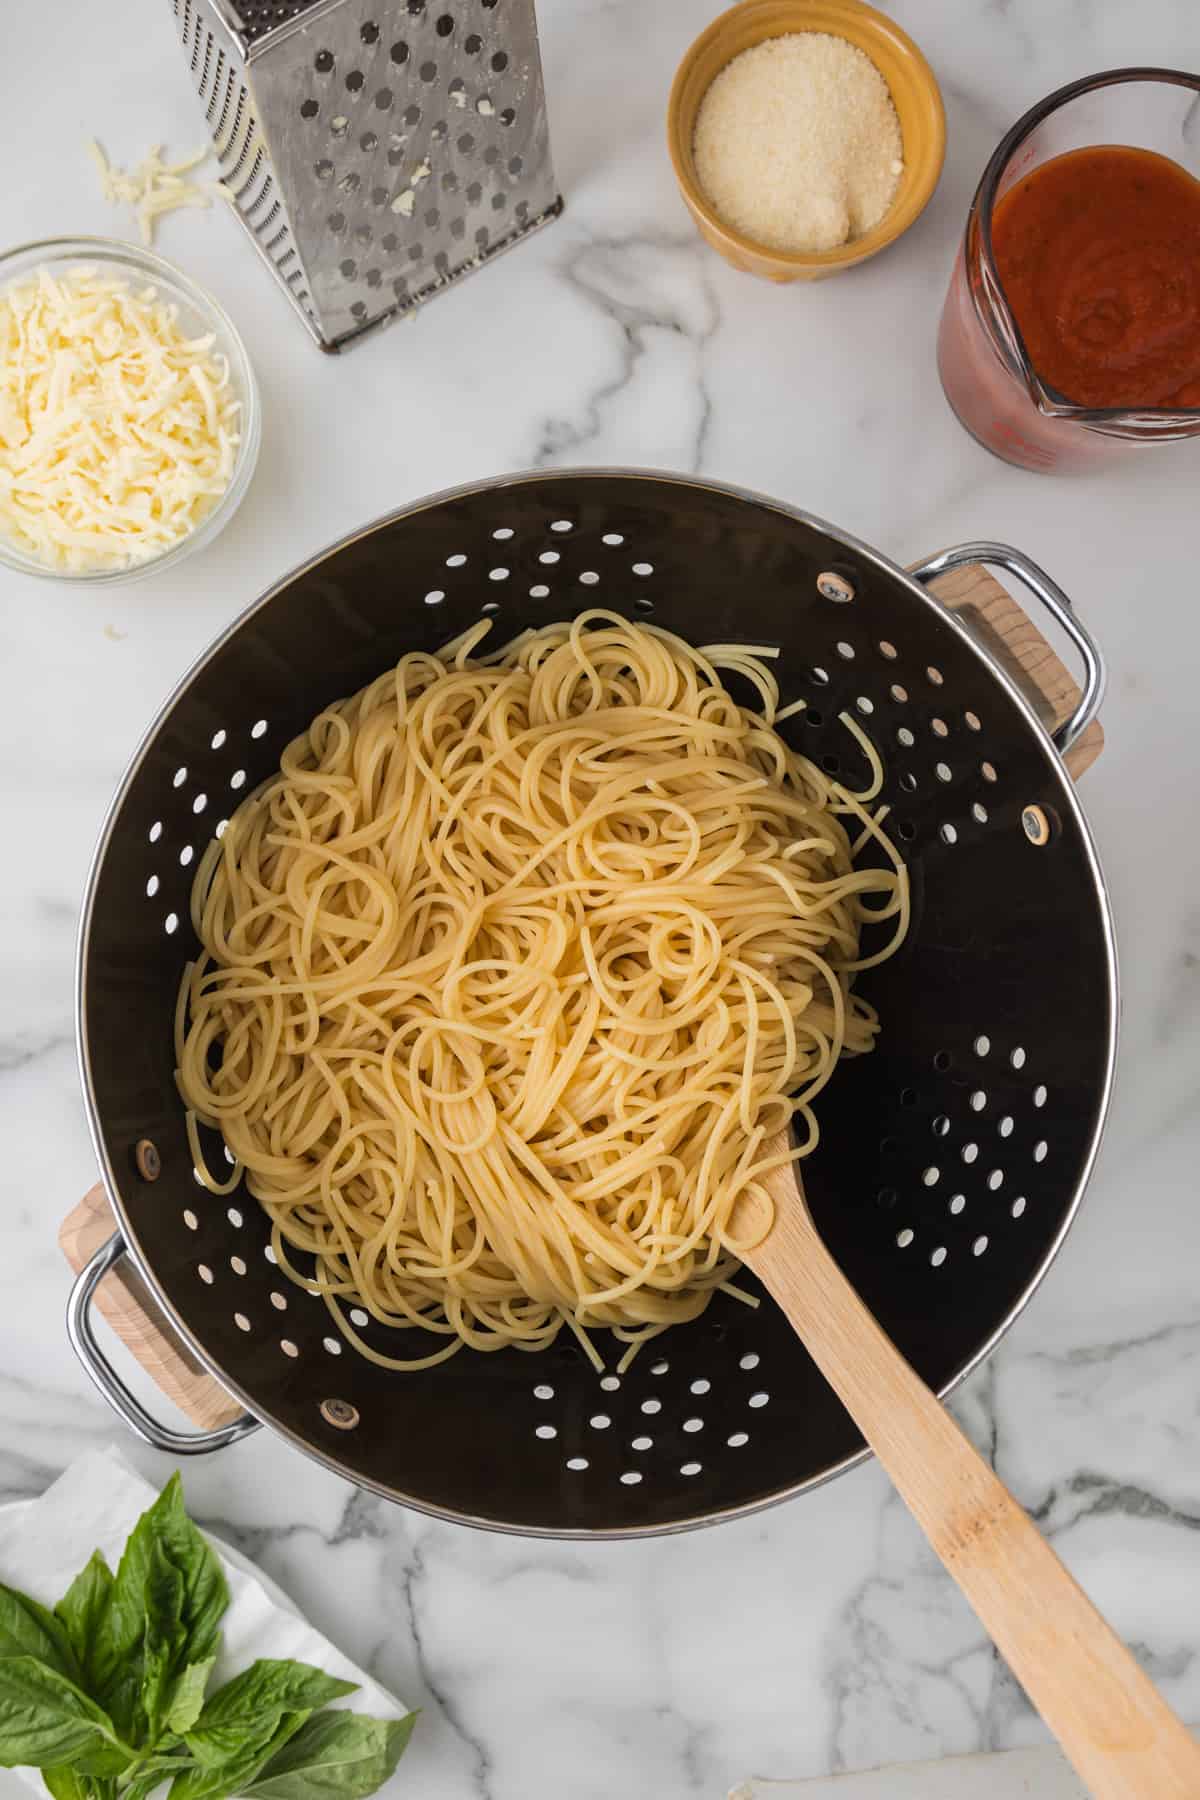 Spaghetti in a colander with ingredients and a wooden spoon.